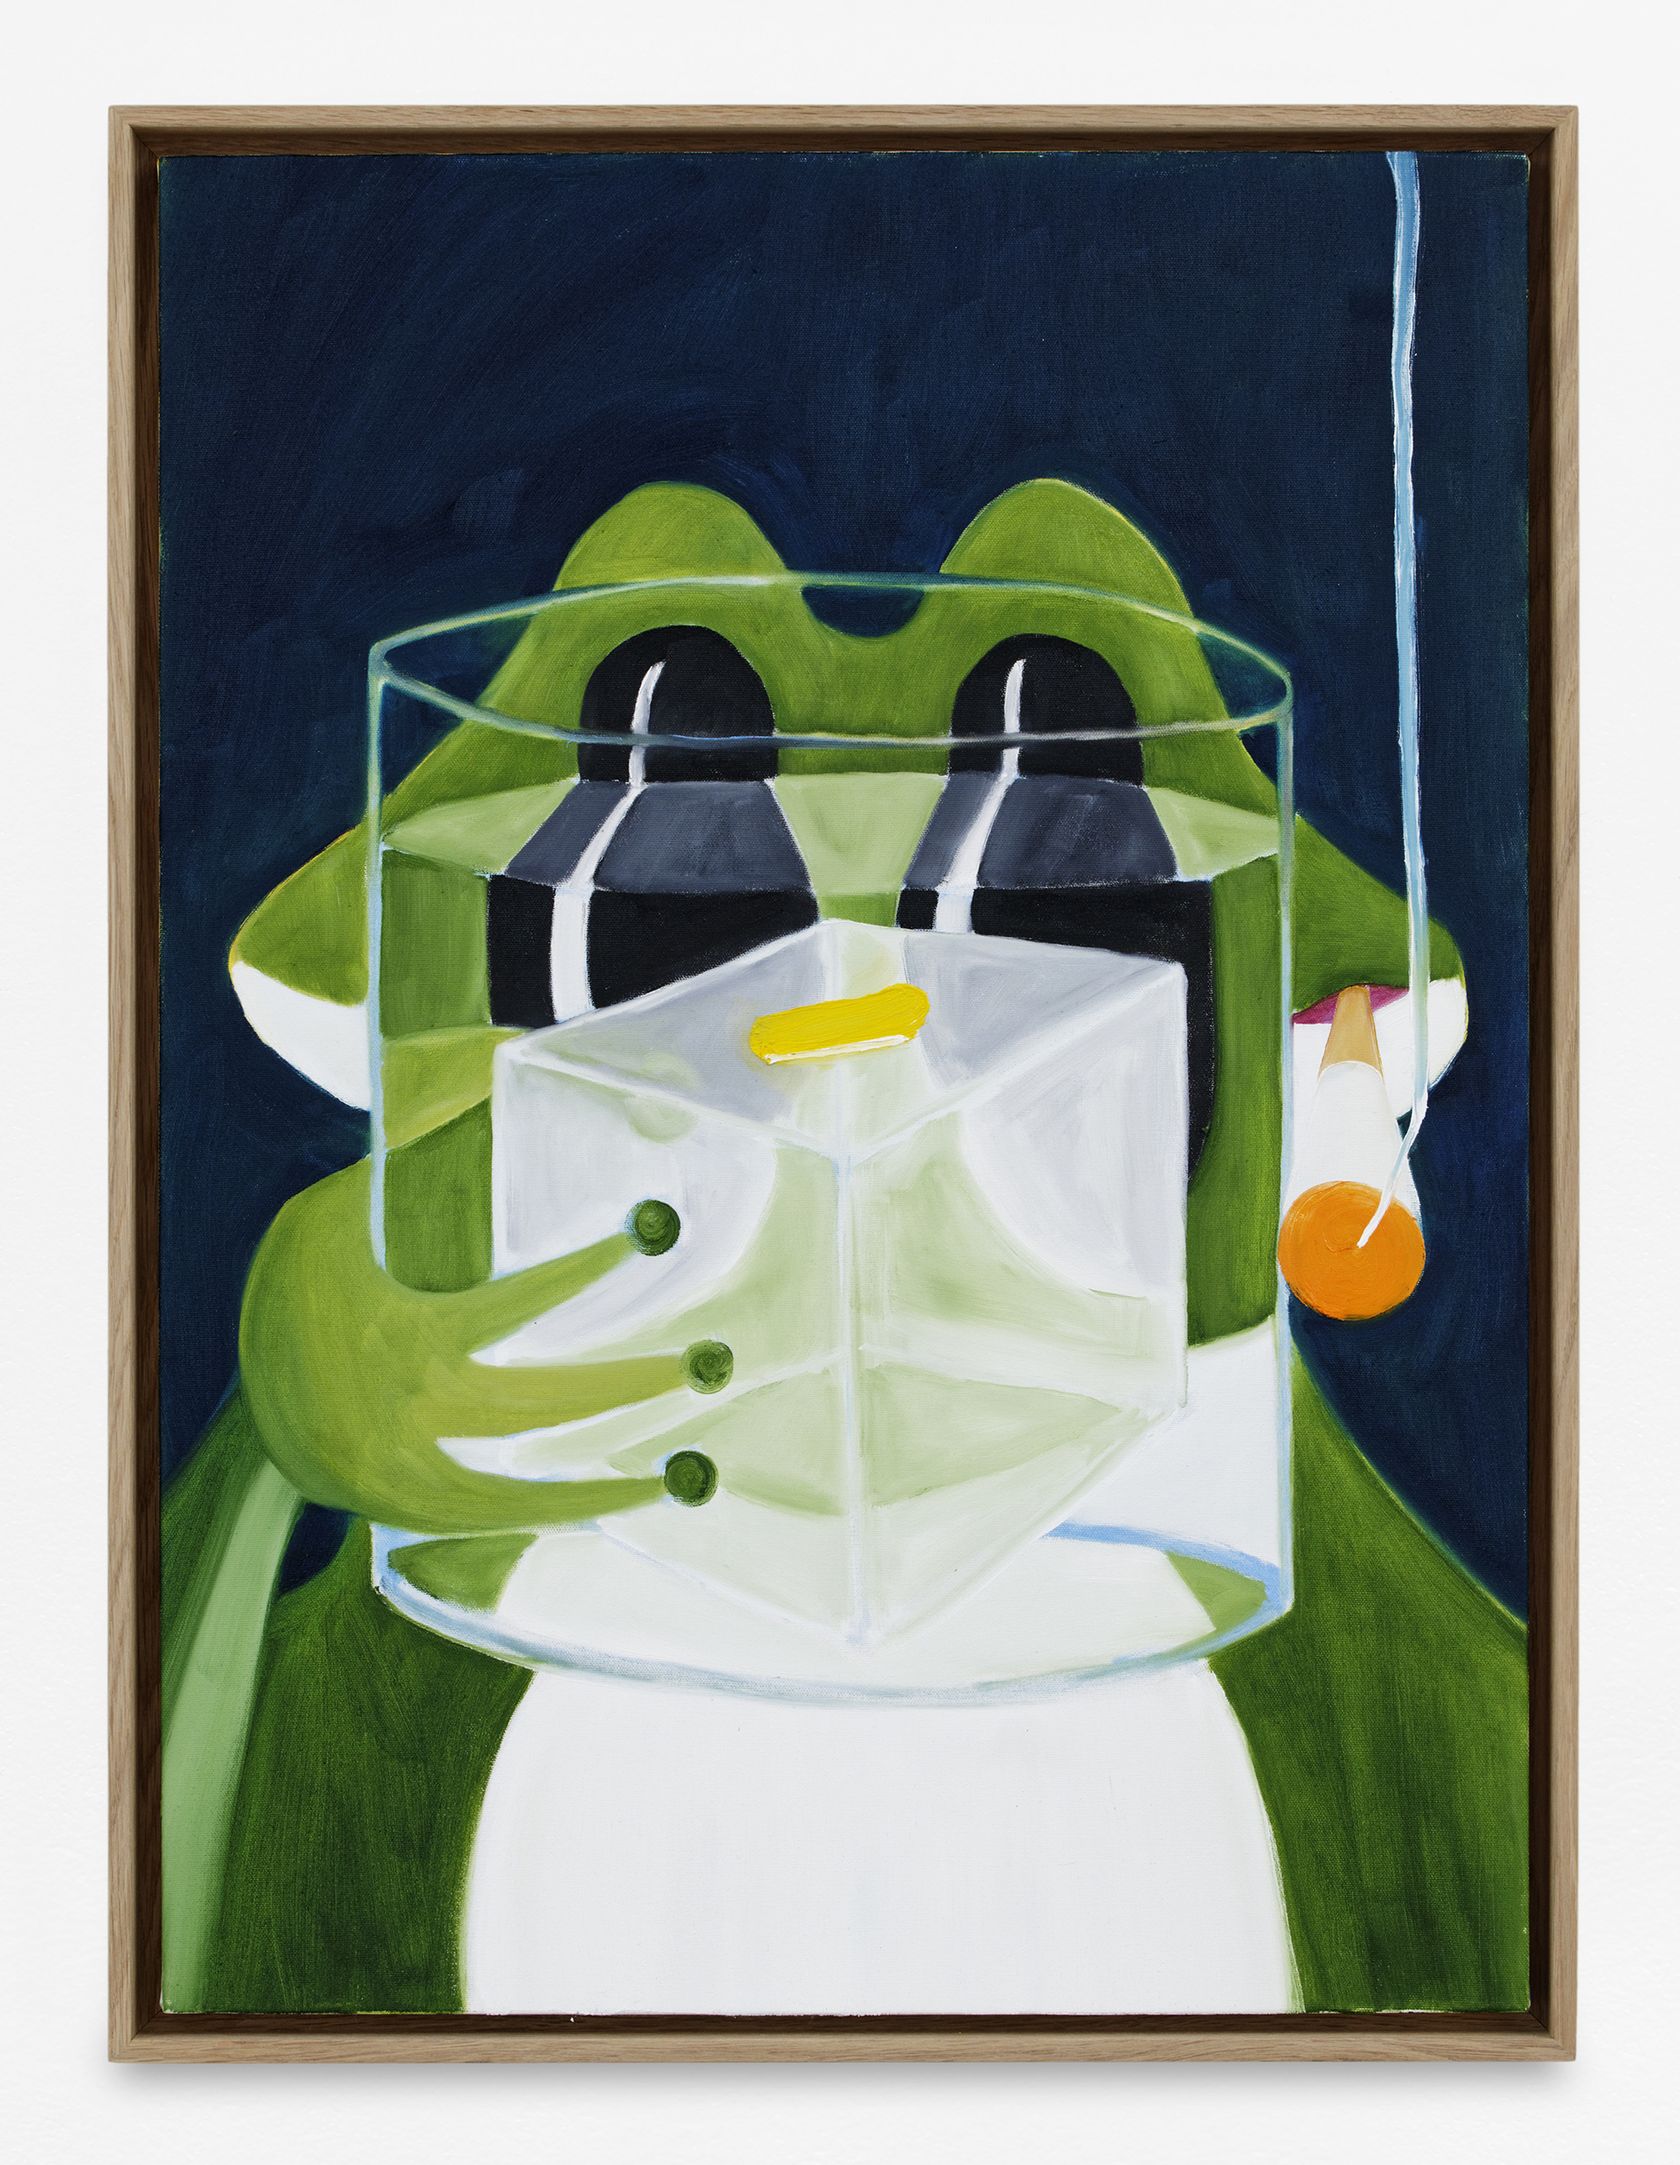 Keith Boadwee, Vodka Martini Rocks with a Twist, 2021 Huile sur toile76 × 56 cm / 30 × 22 in. | 80 × 60 × 4 cm / 31 1/2 × 23 5/8 × 1 5/8 in. (encadré/framed)